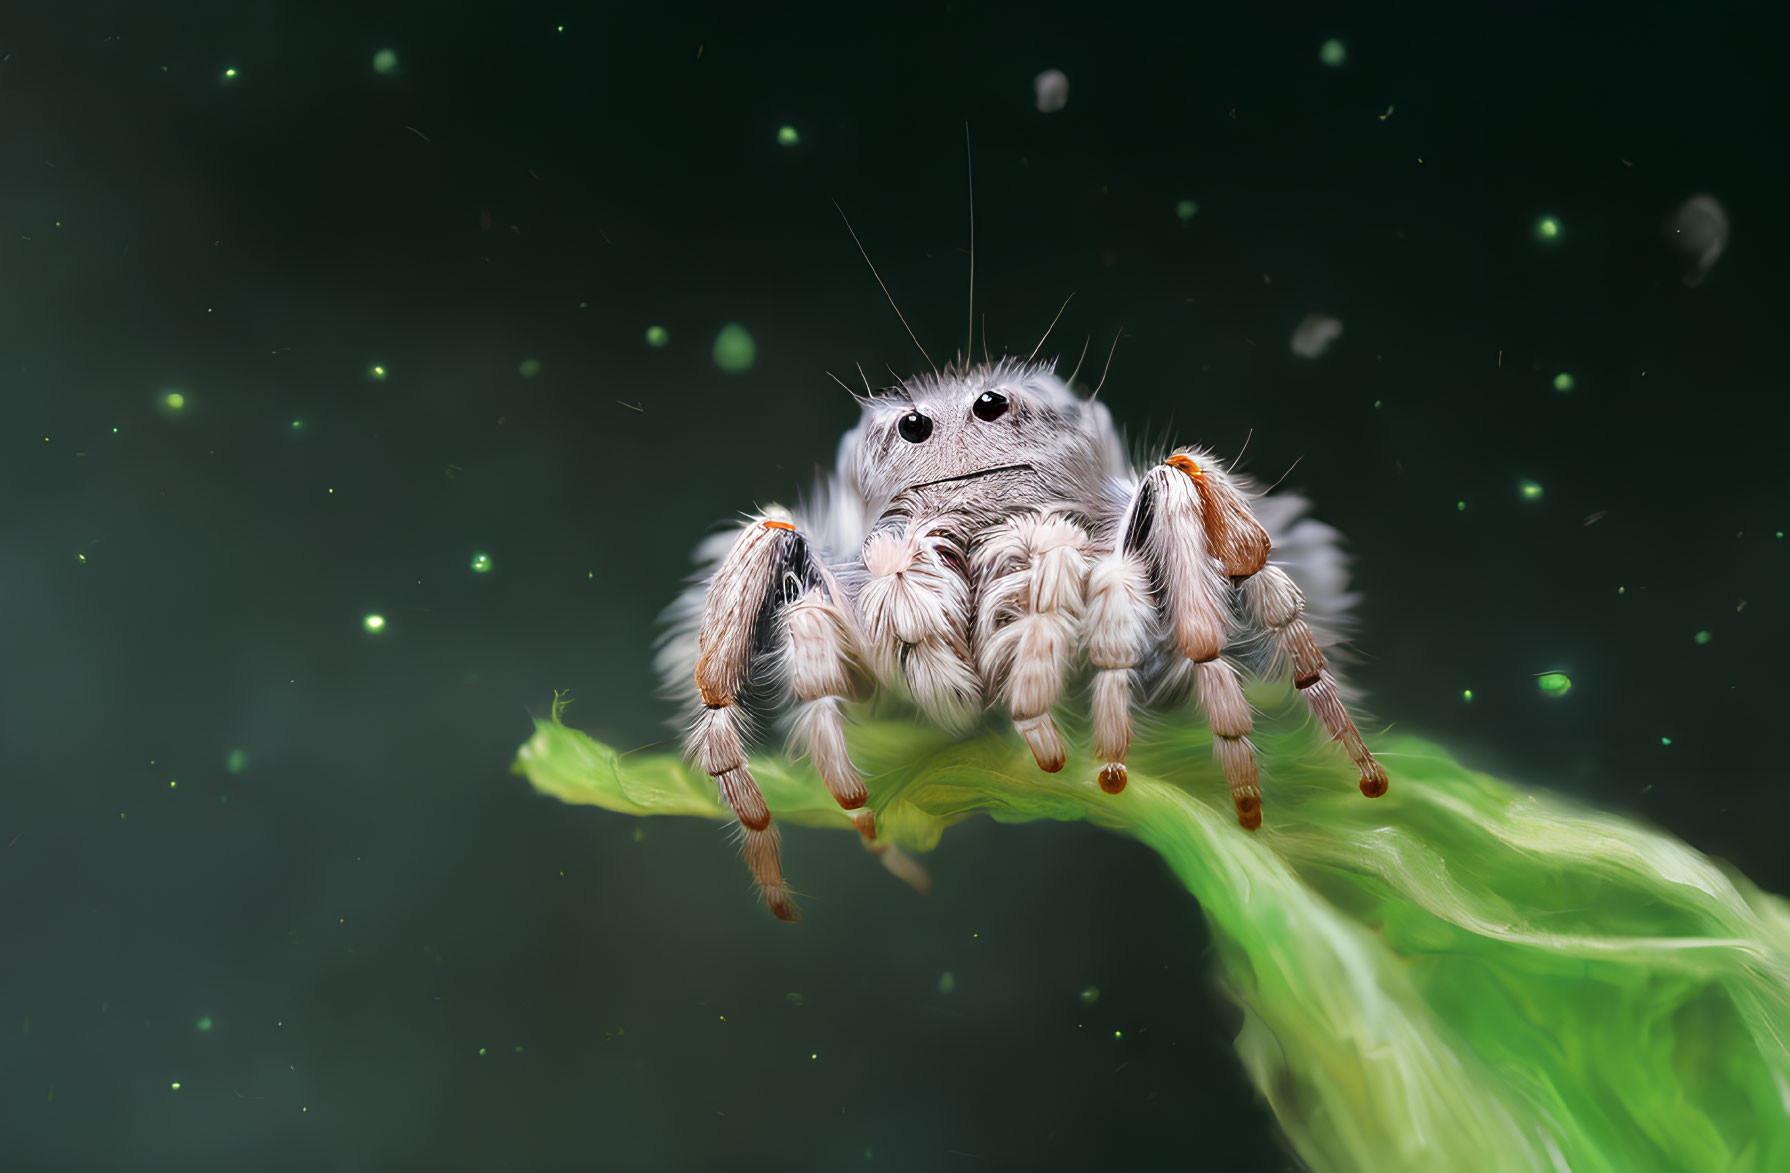 Jumping Spider Close-Up on Green Leaf with Soft Green Lights